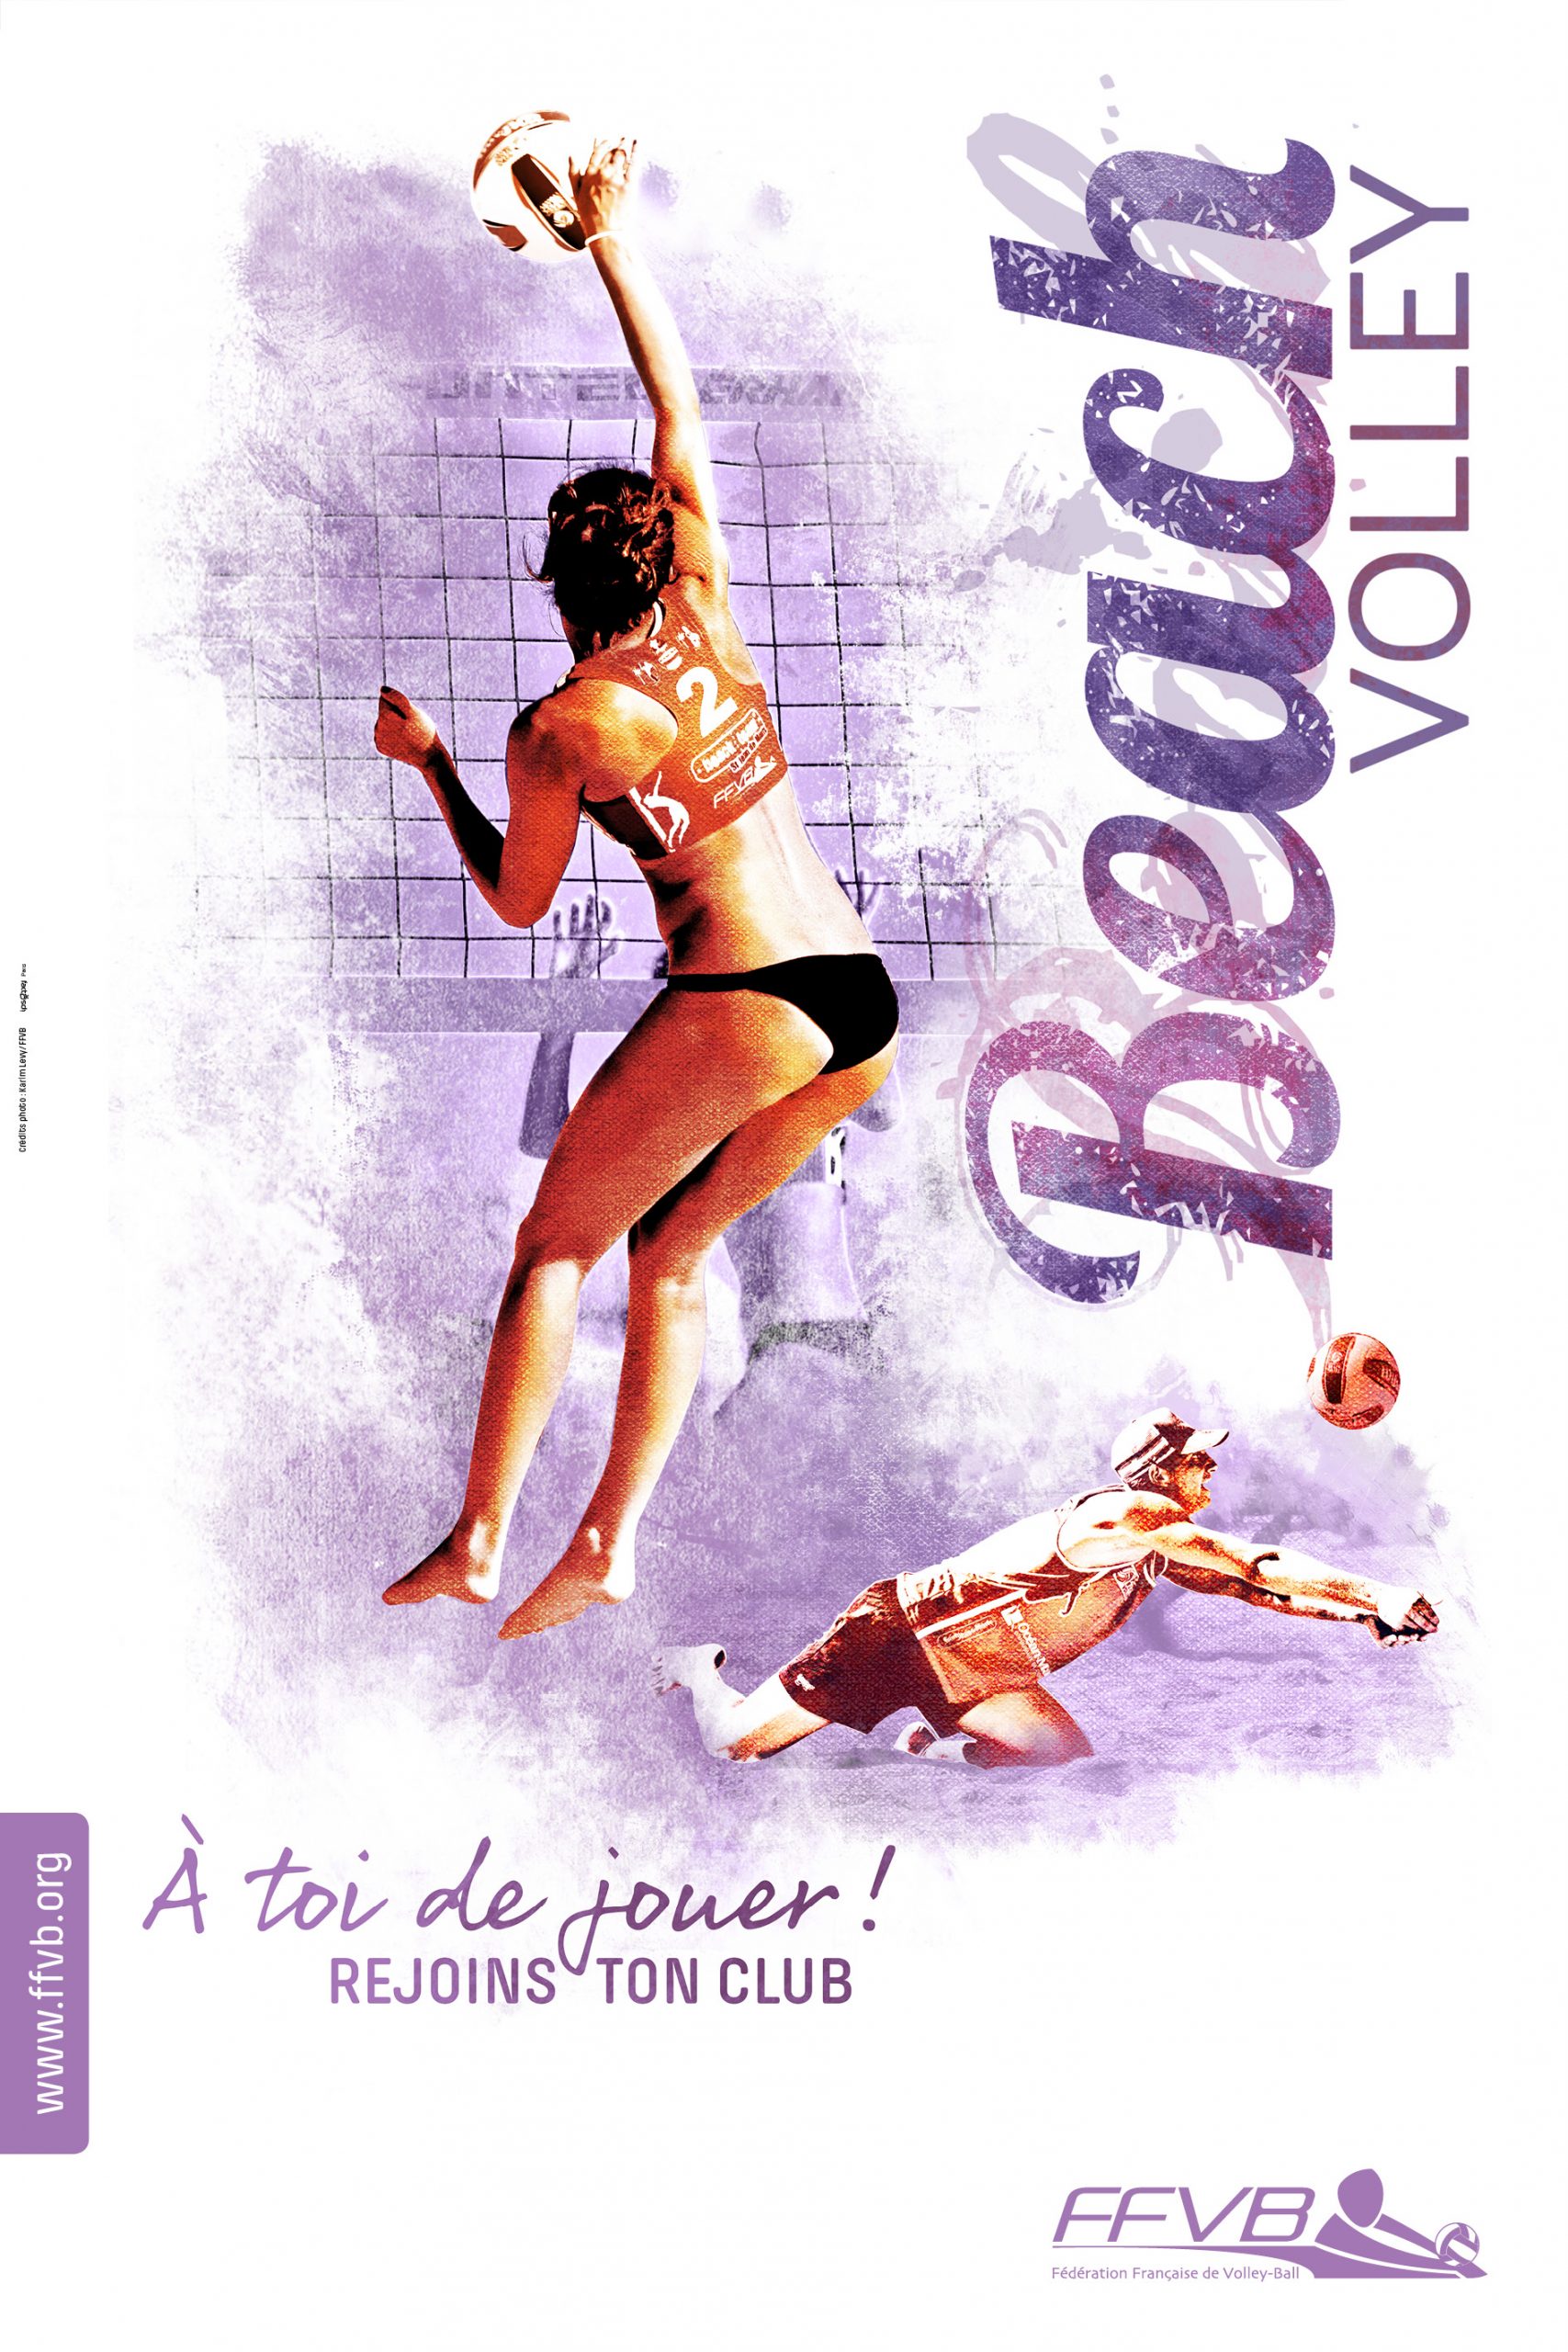 FFVB-Campagne affiches rentrée 2014-3